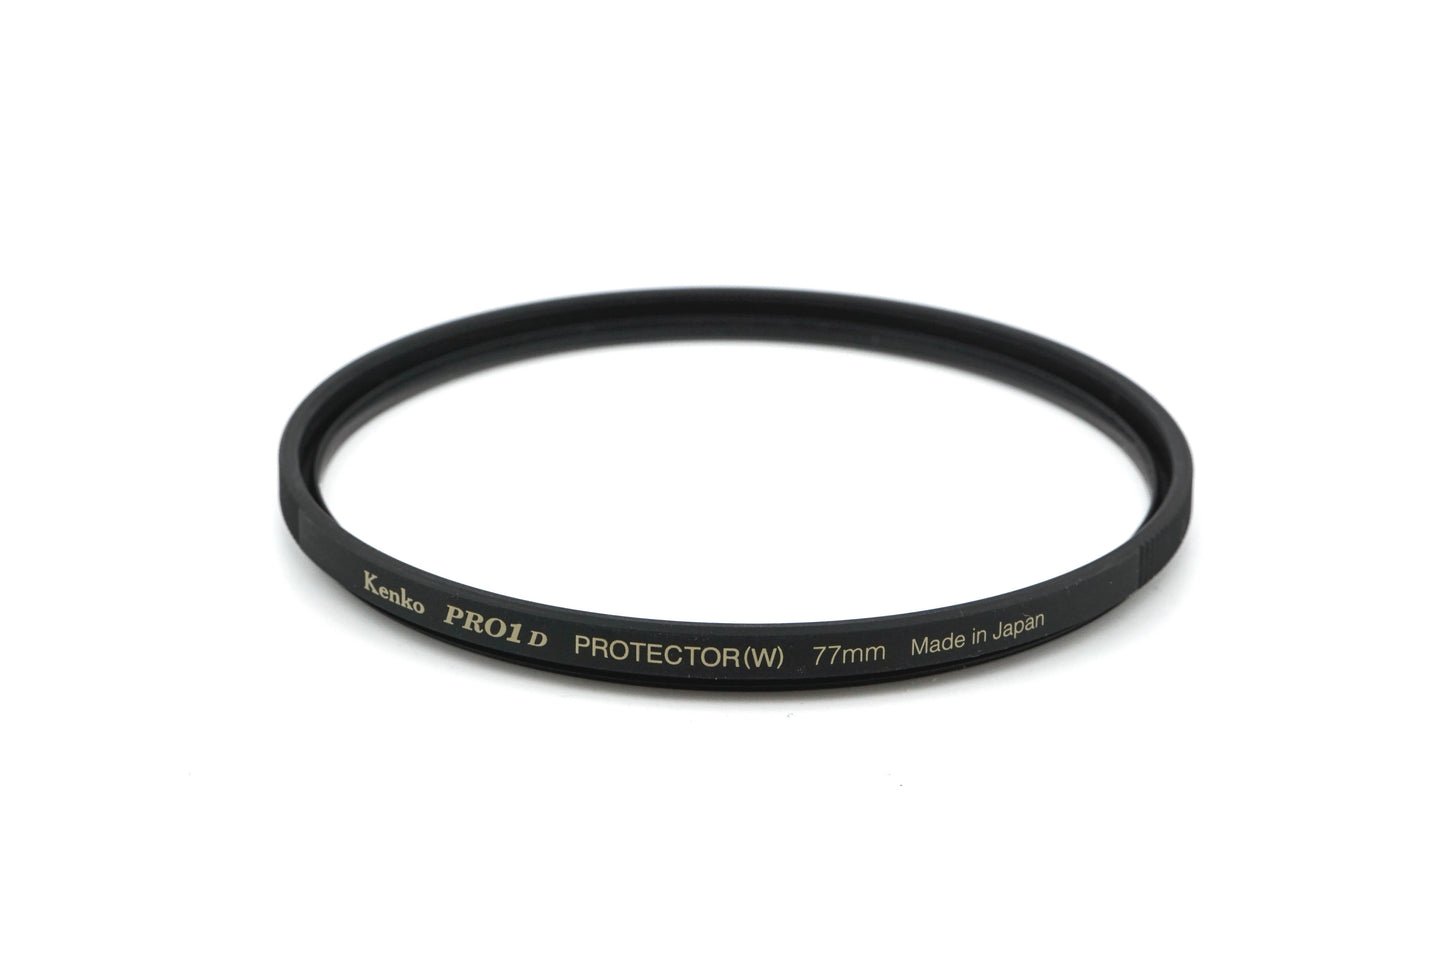 Kenko 77mm Pro1D Protector(W) Filter - Accessory